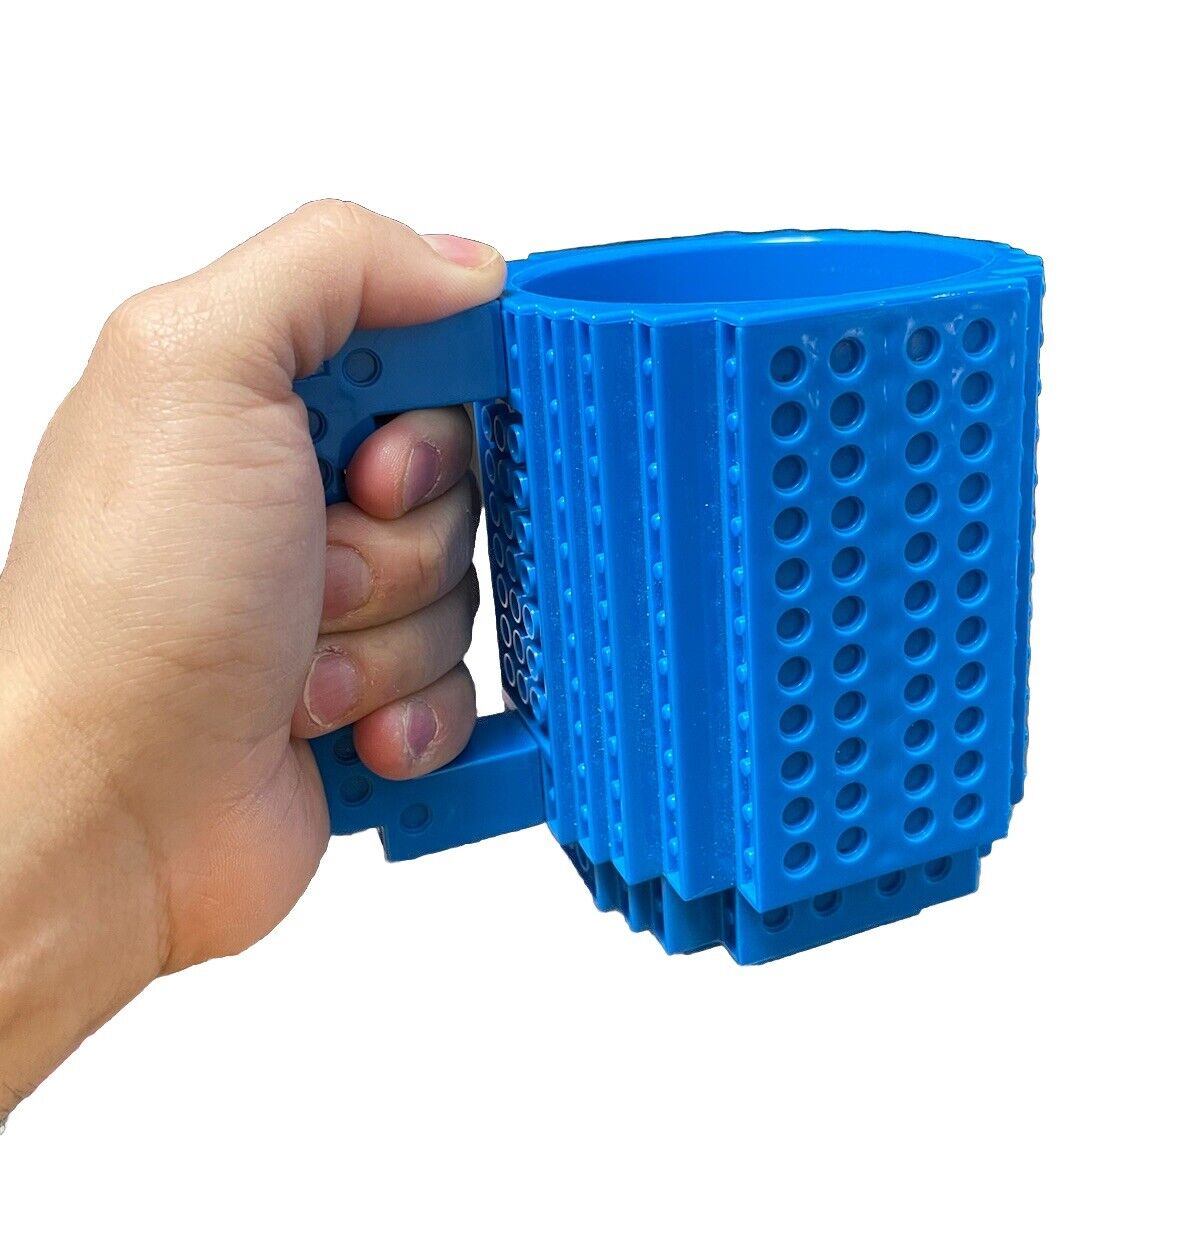 Blue Lego Cup, coffee mug. Fits lego pieces while drinking